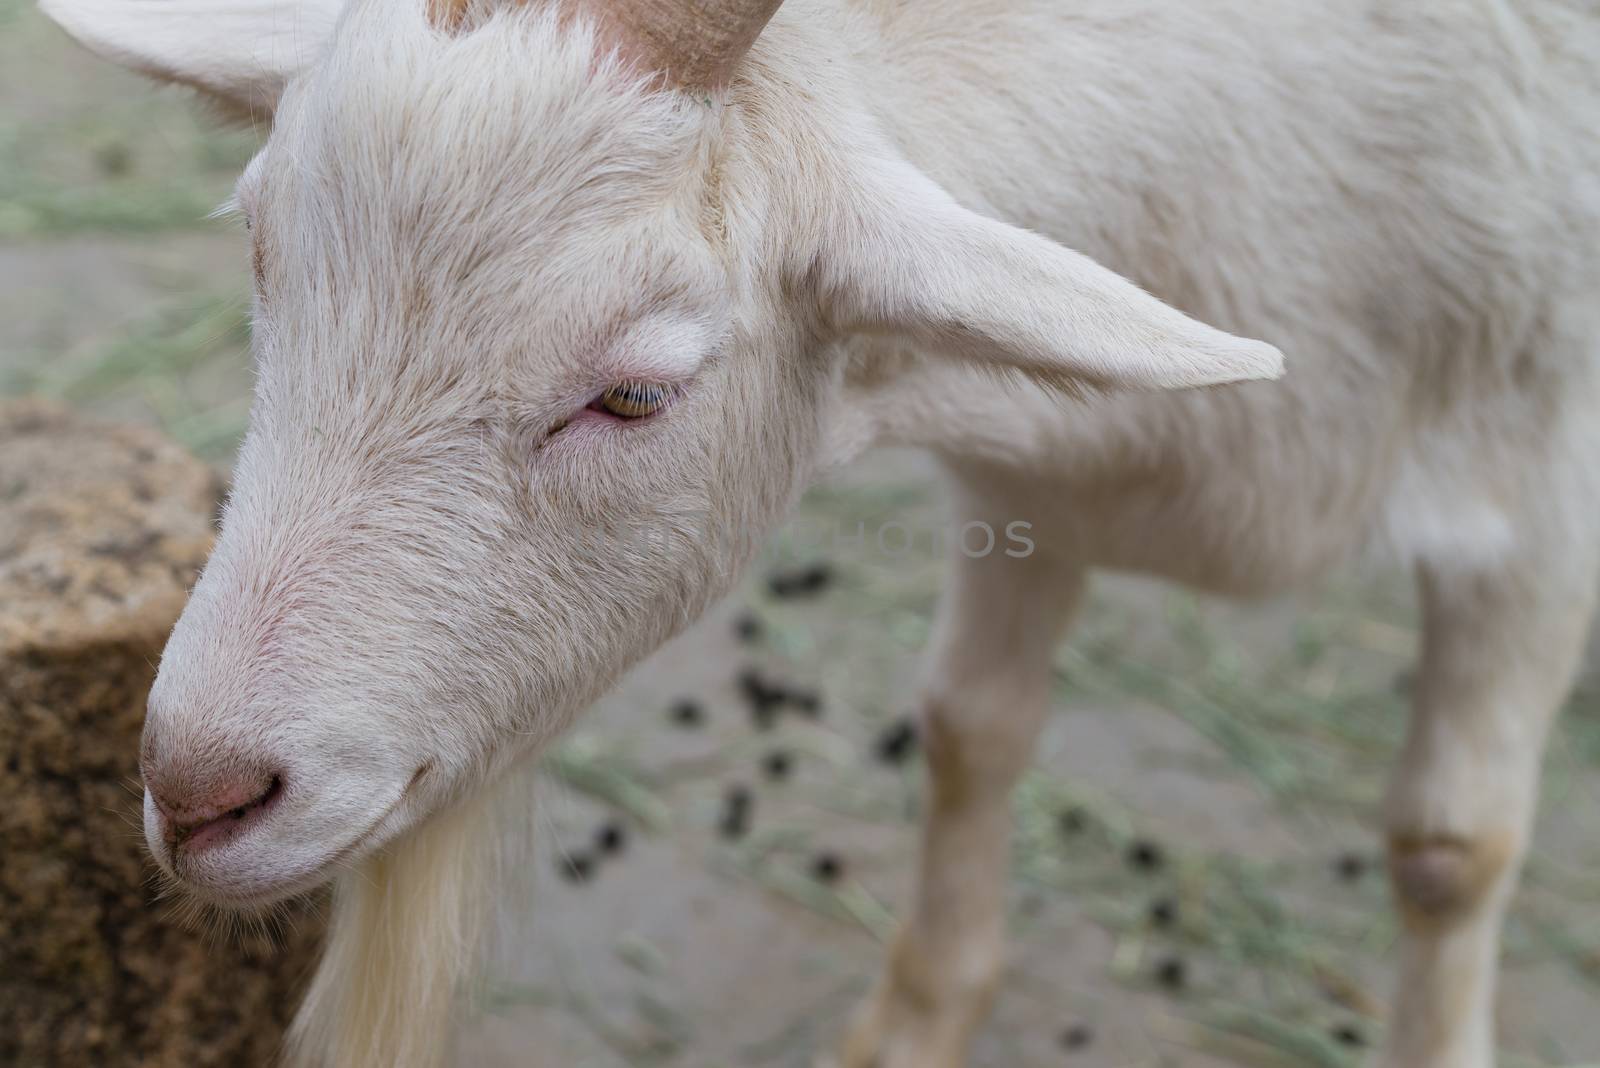 A white goat's face and front legs.